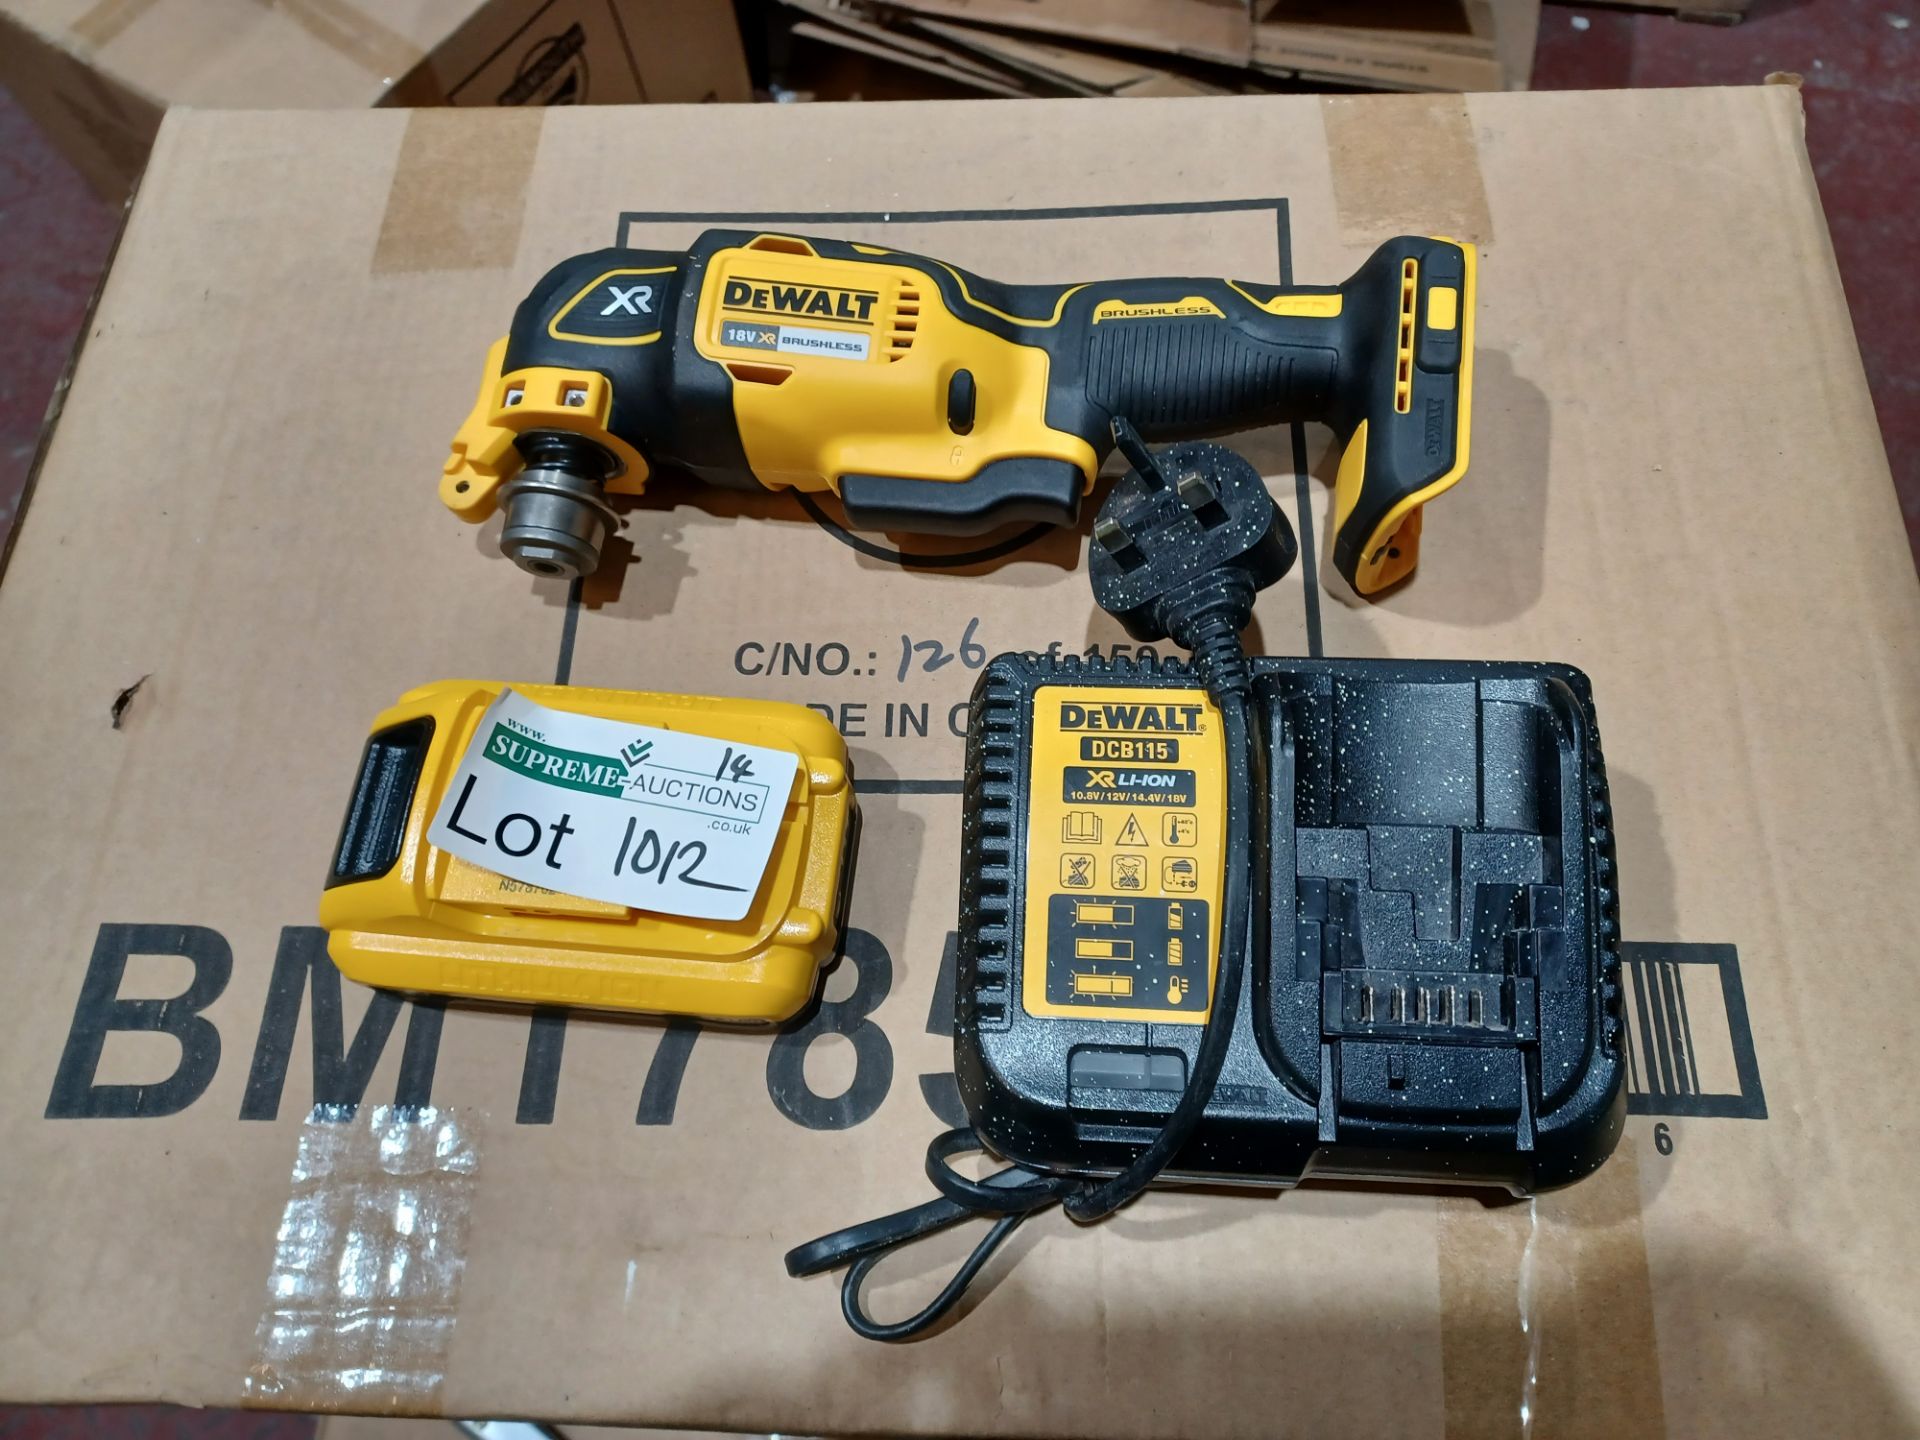 DEWALT DCS355N-XJ 18V LI-ION XR BRUSHLESS CORDLESS OSCILLATING MULTI-TOOL - WITH BATTERY AND CHARGER